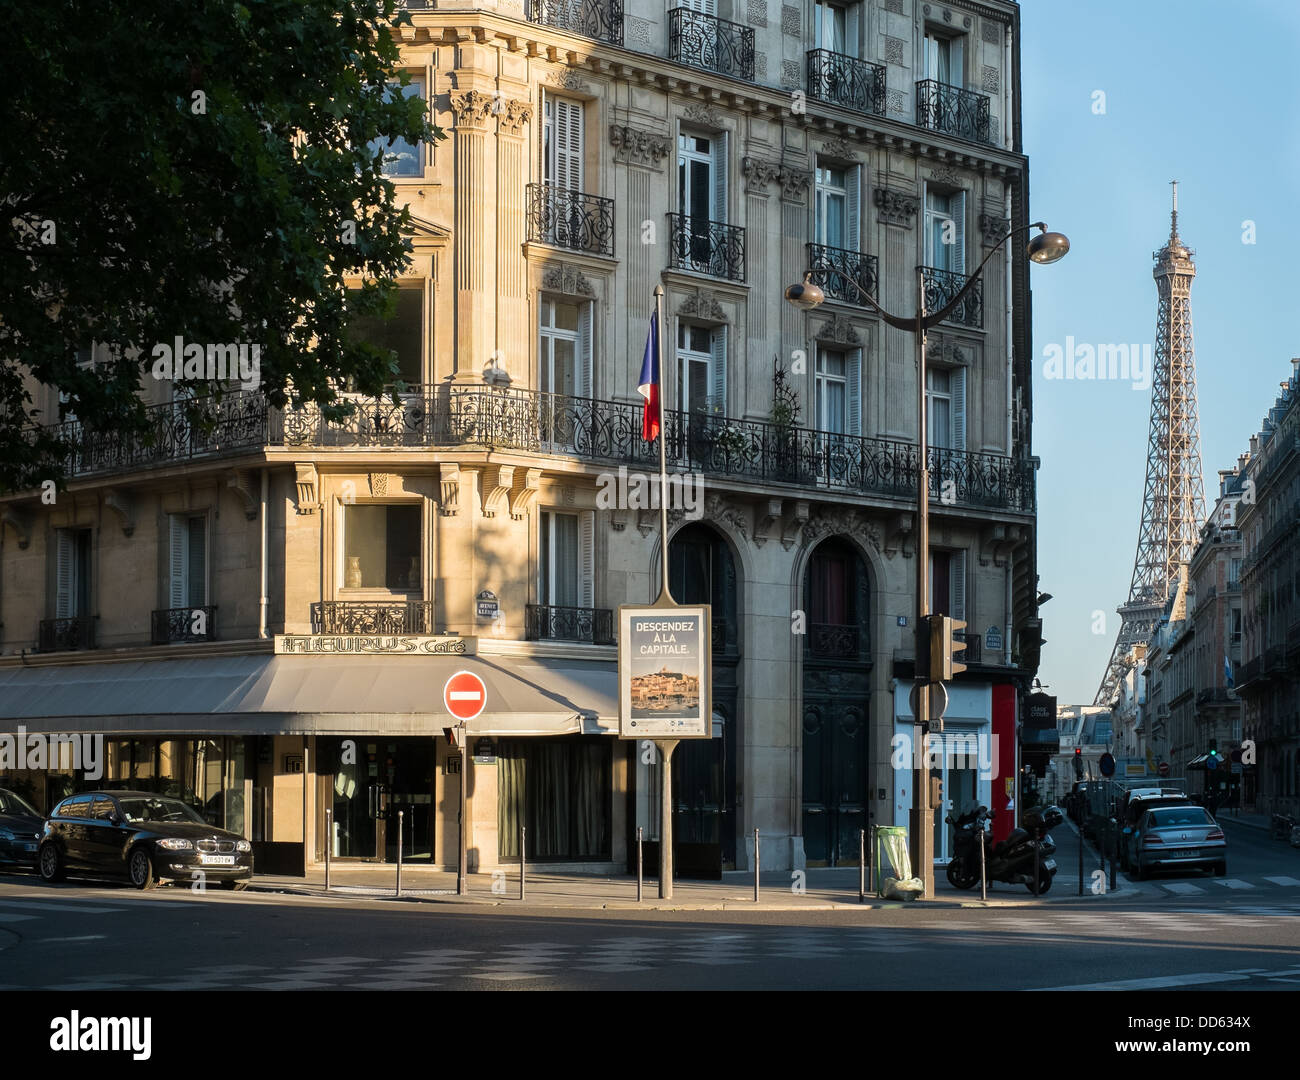 Eiffel Tower in the background of a Paris street scene. Stock Photo